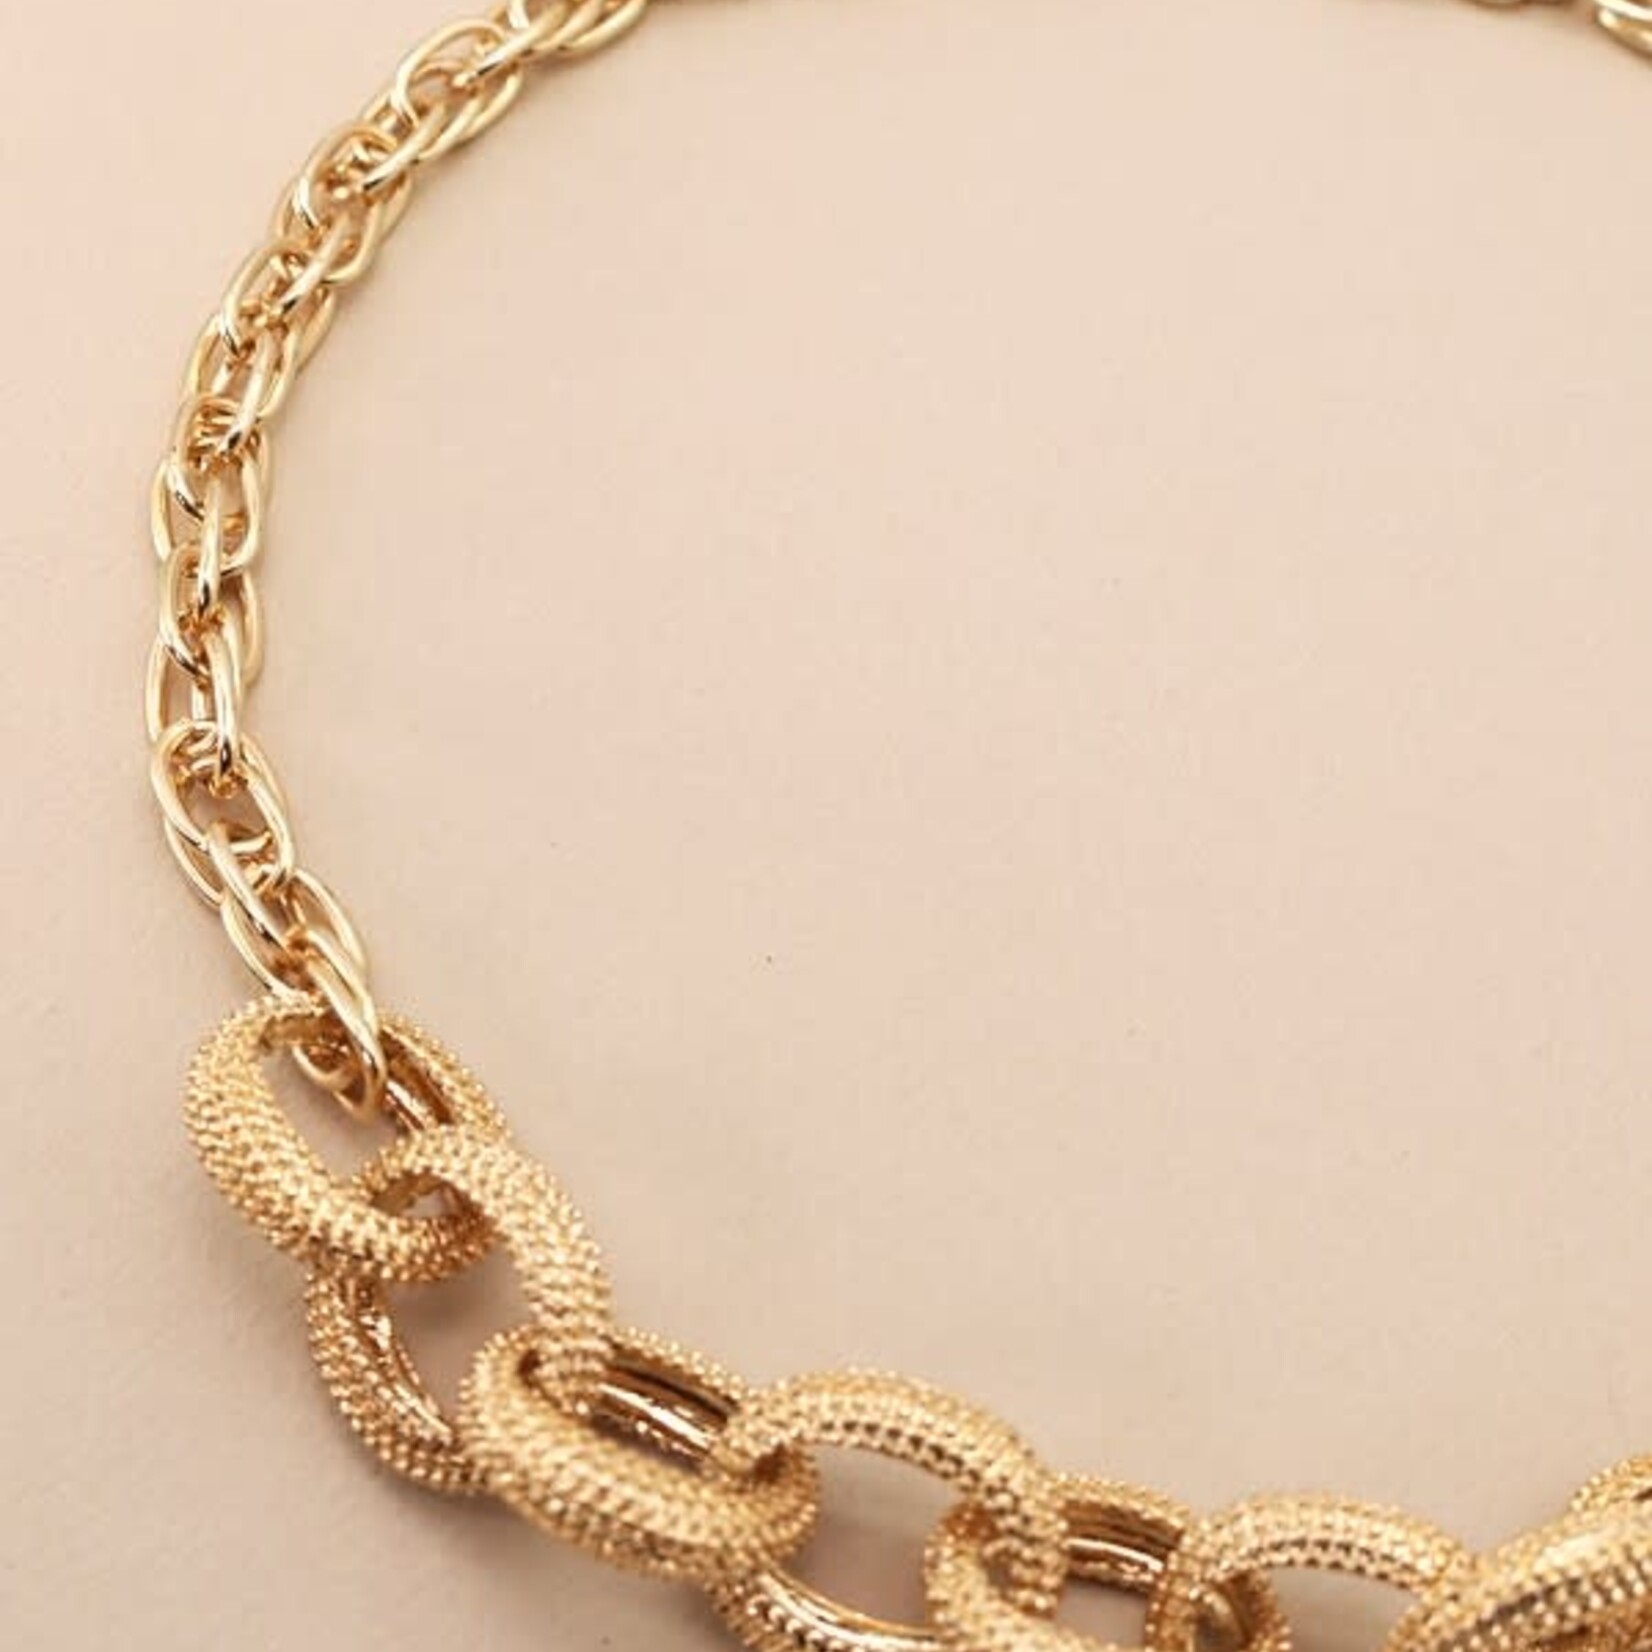 Josslyn-Wall to Wall Caviar Chain link Necklace